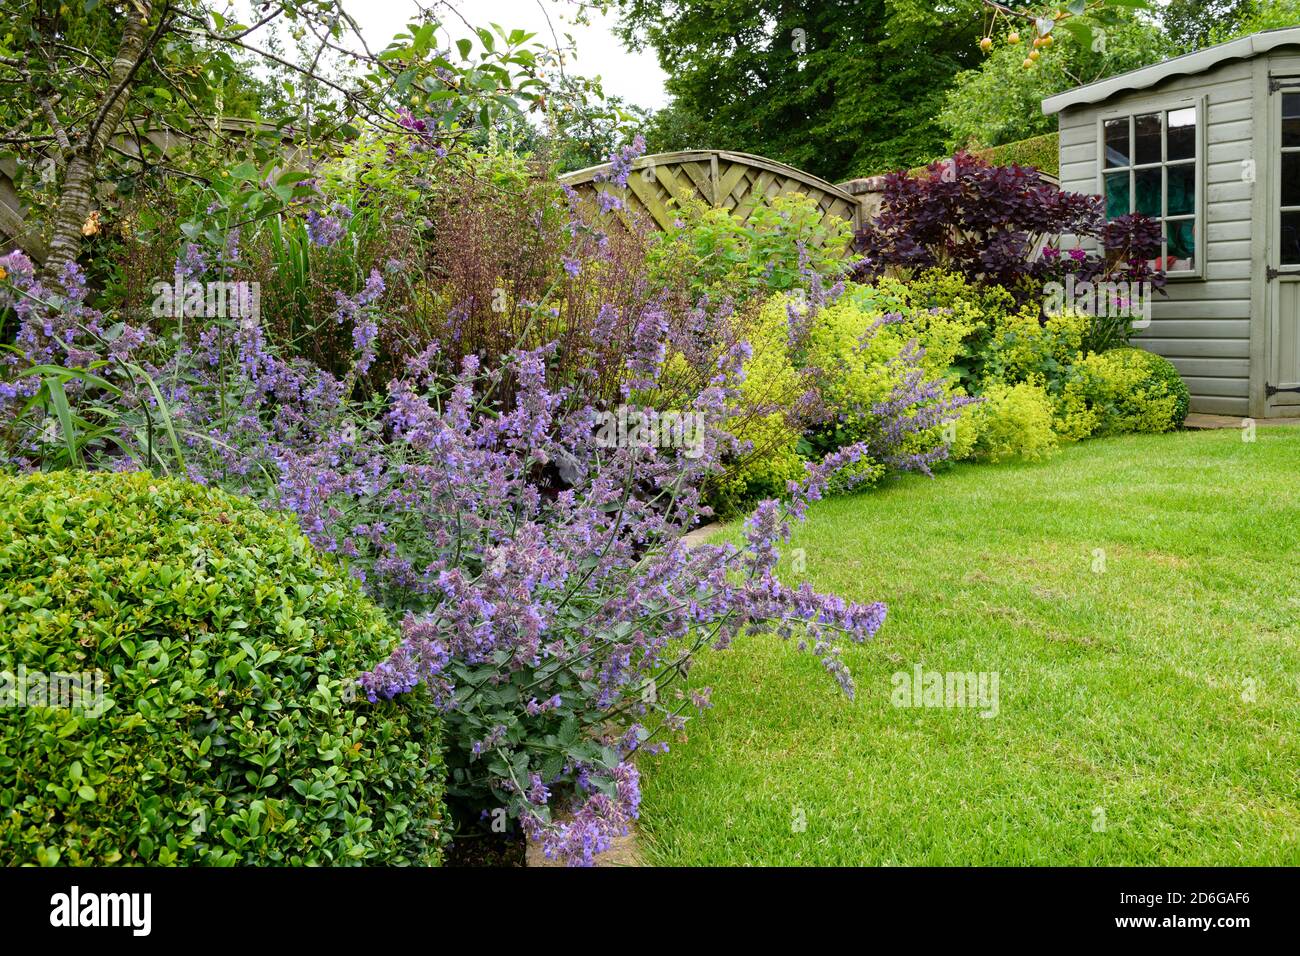 Landscaped private garden (contemporary design, summer flowers, mixed border plants & shrubs, corner summerhouse shed, lawn) - Yorkshire, England, UK. Stock Photo